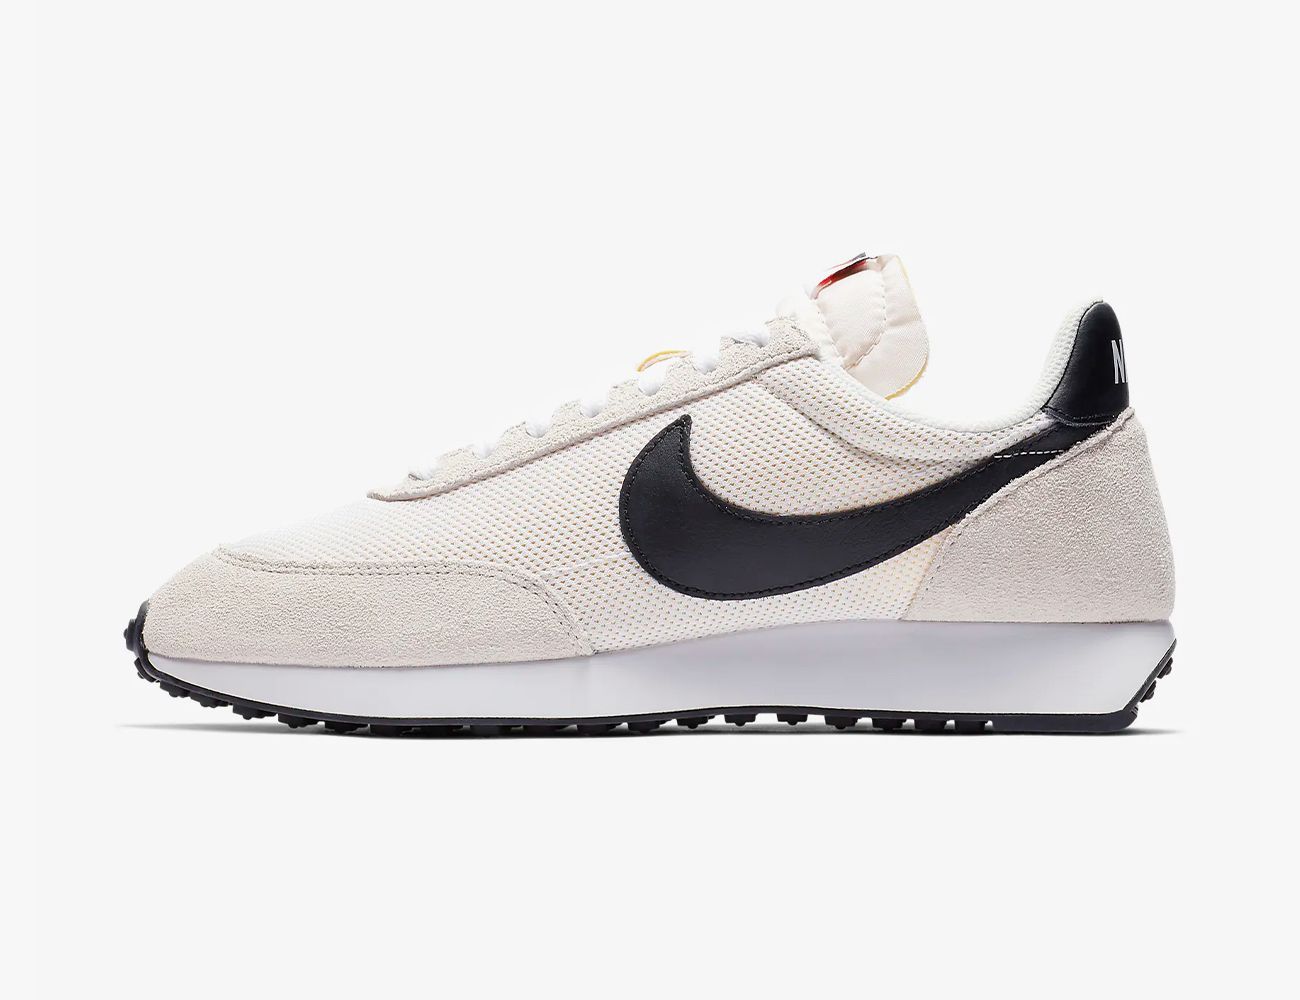 10 Nike Sneakers You Can Buy Now That Capture the 1980s Vibes of 'Air'